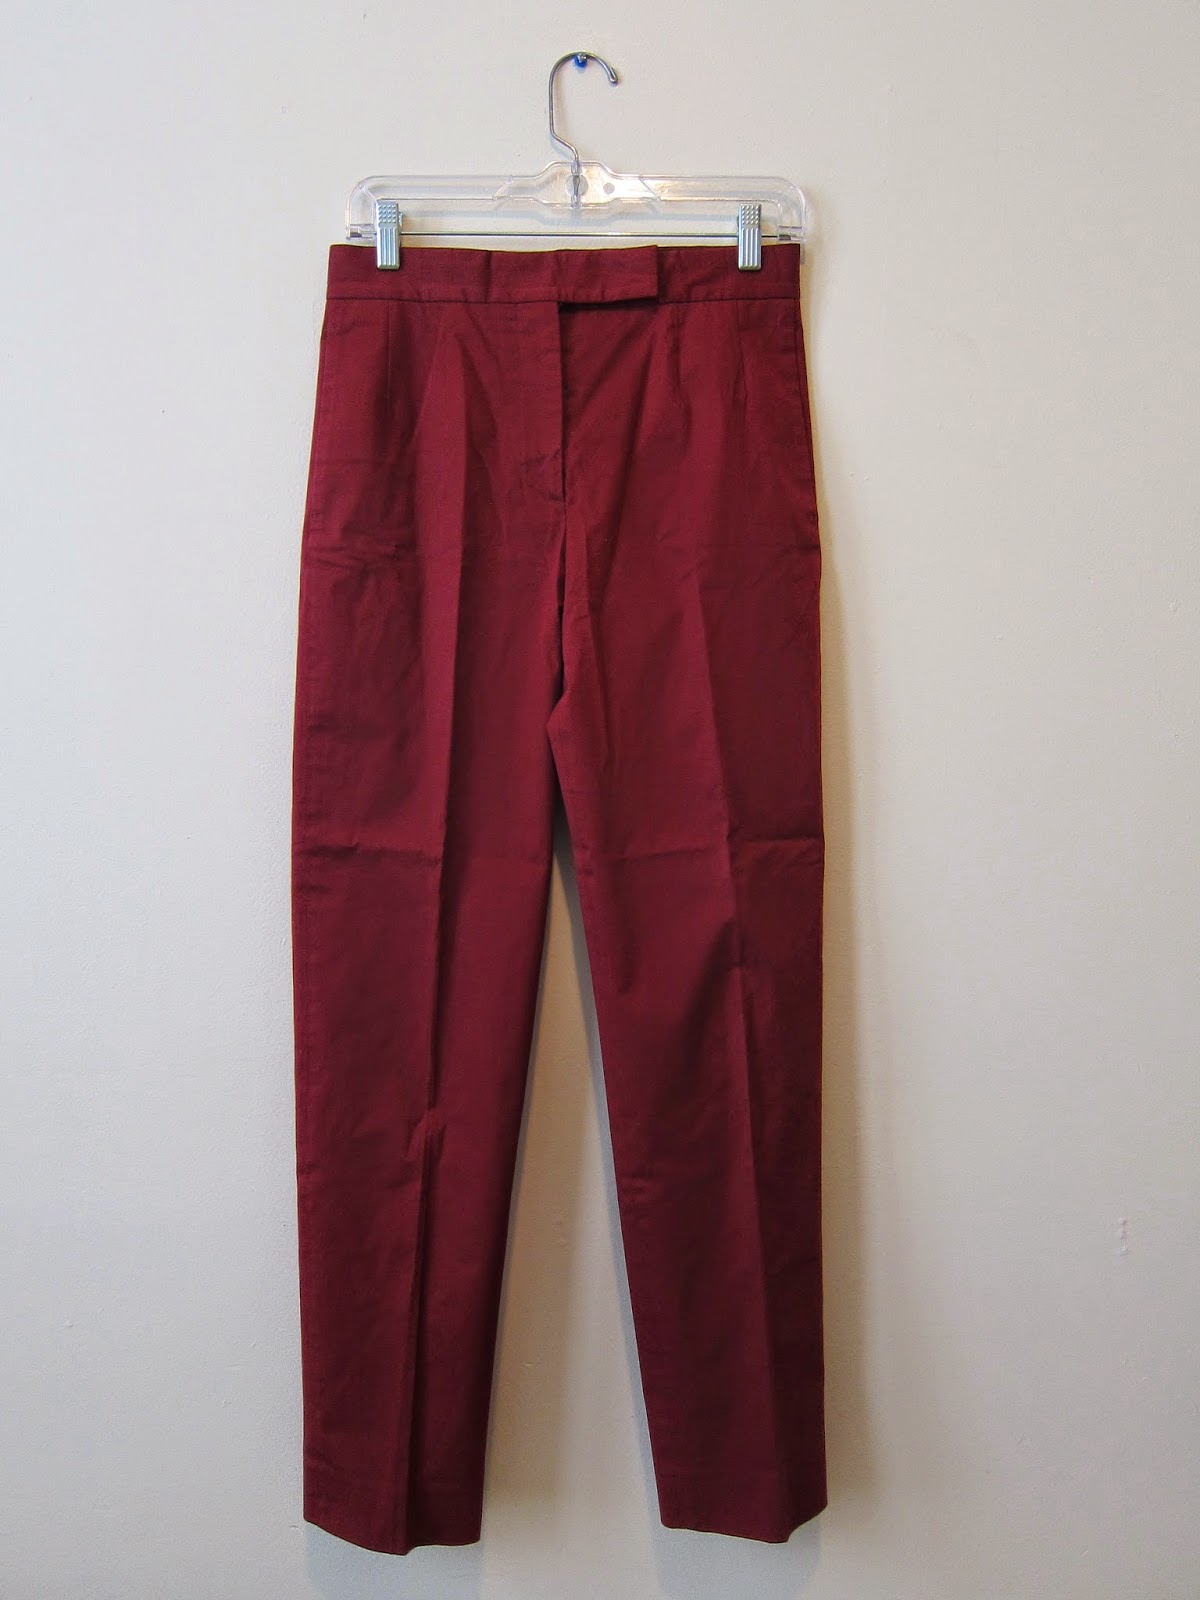 laws of general economy: Missoni Pants, Size 40 (4/6)